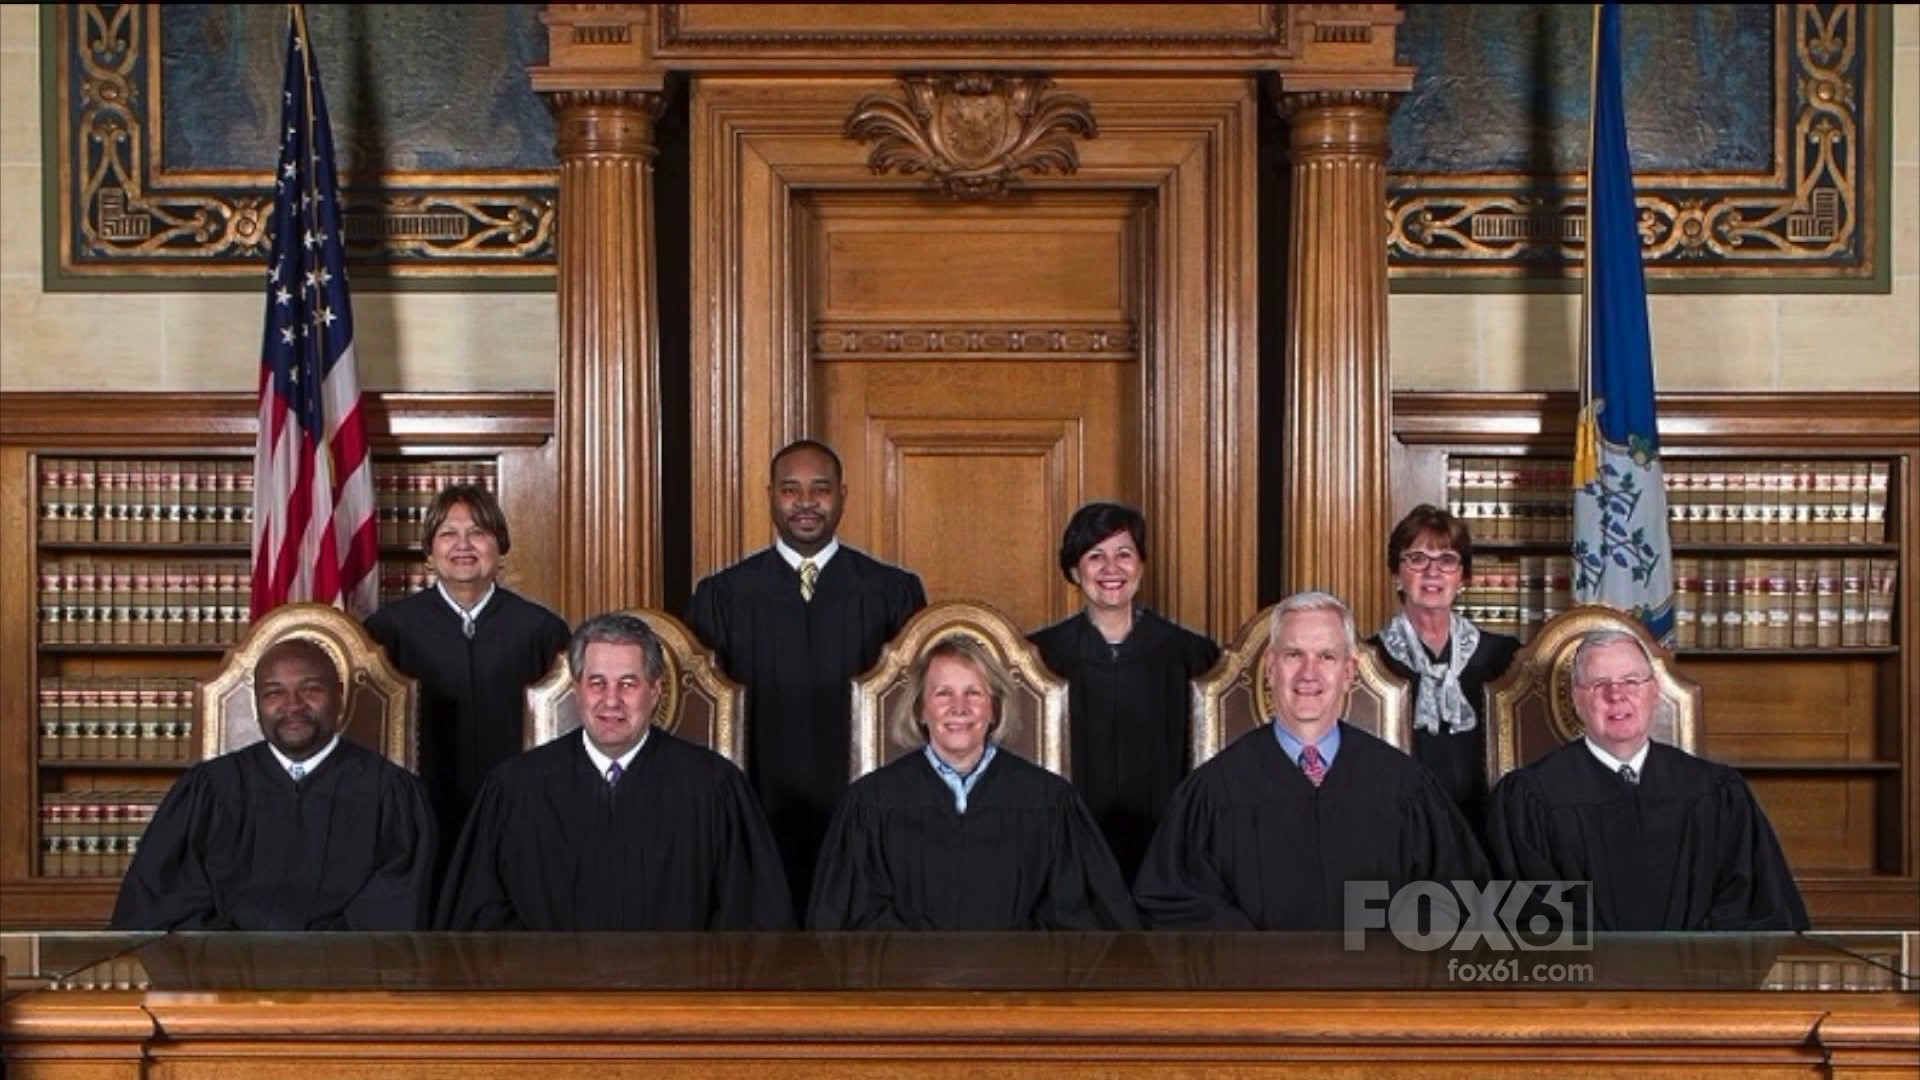 The Real Story - State Supreme Court